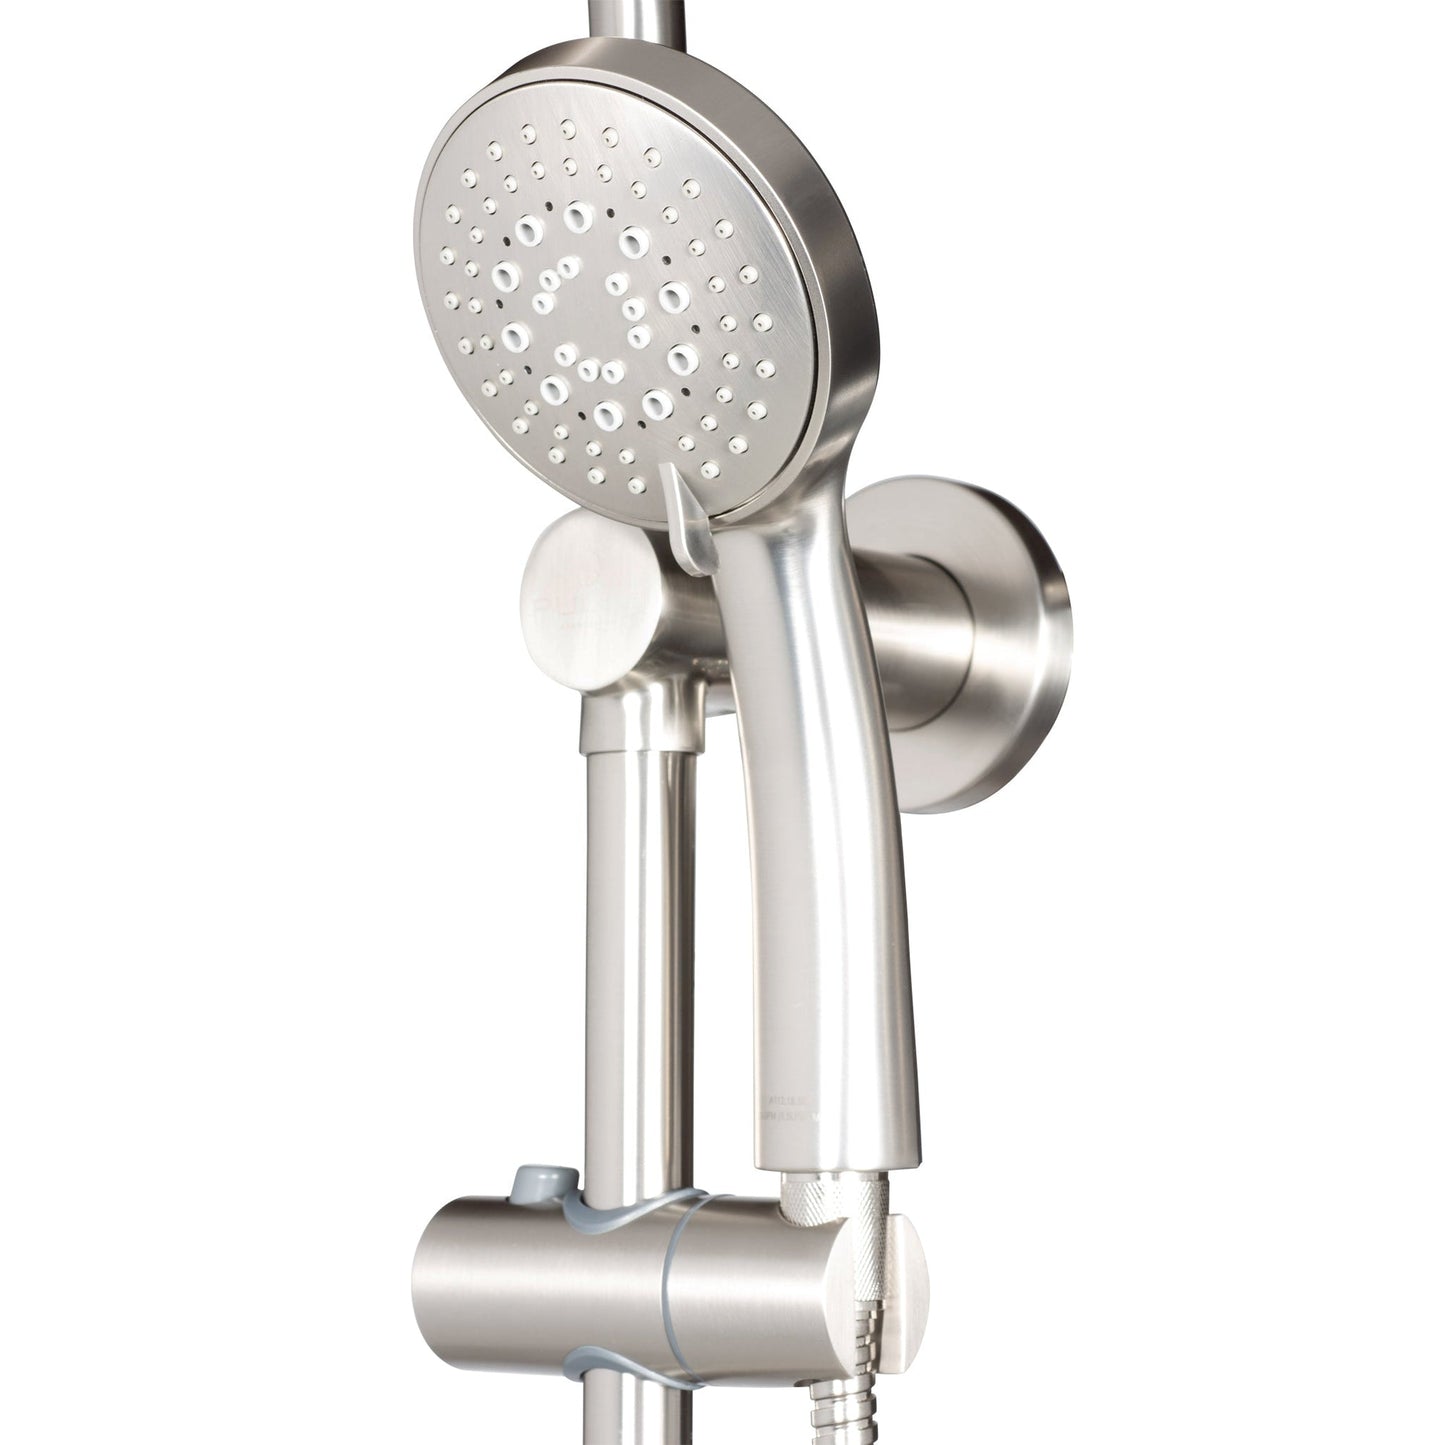 PULSE ShowerSpas Lanai 2.5 GPM Rain Shower System in Brushed Nickel Finish With 3-Power Spray Body Jet and 3-Function Hand Shower